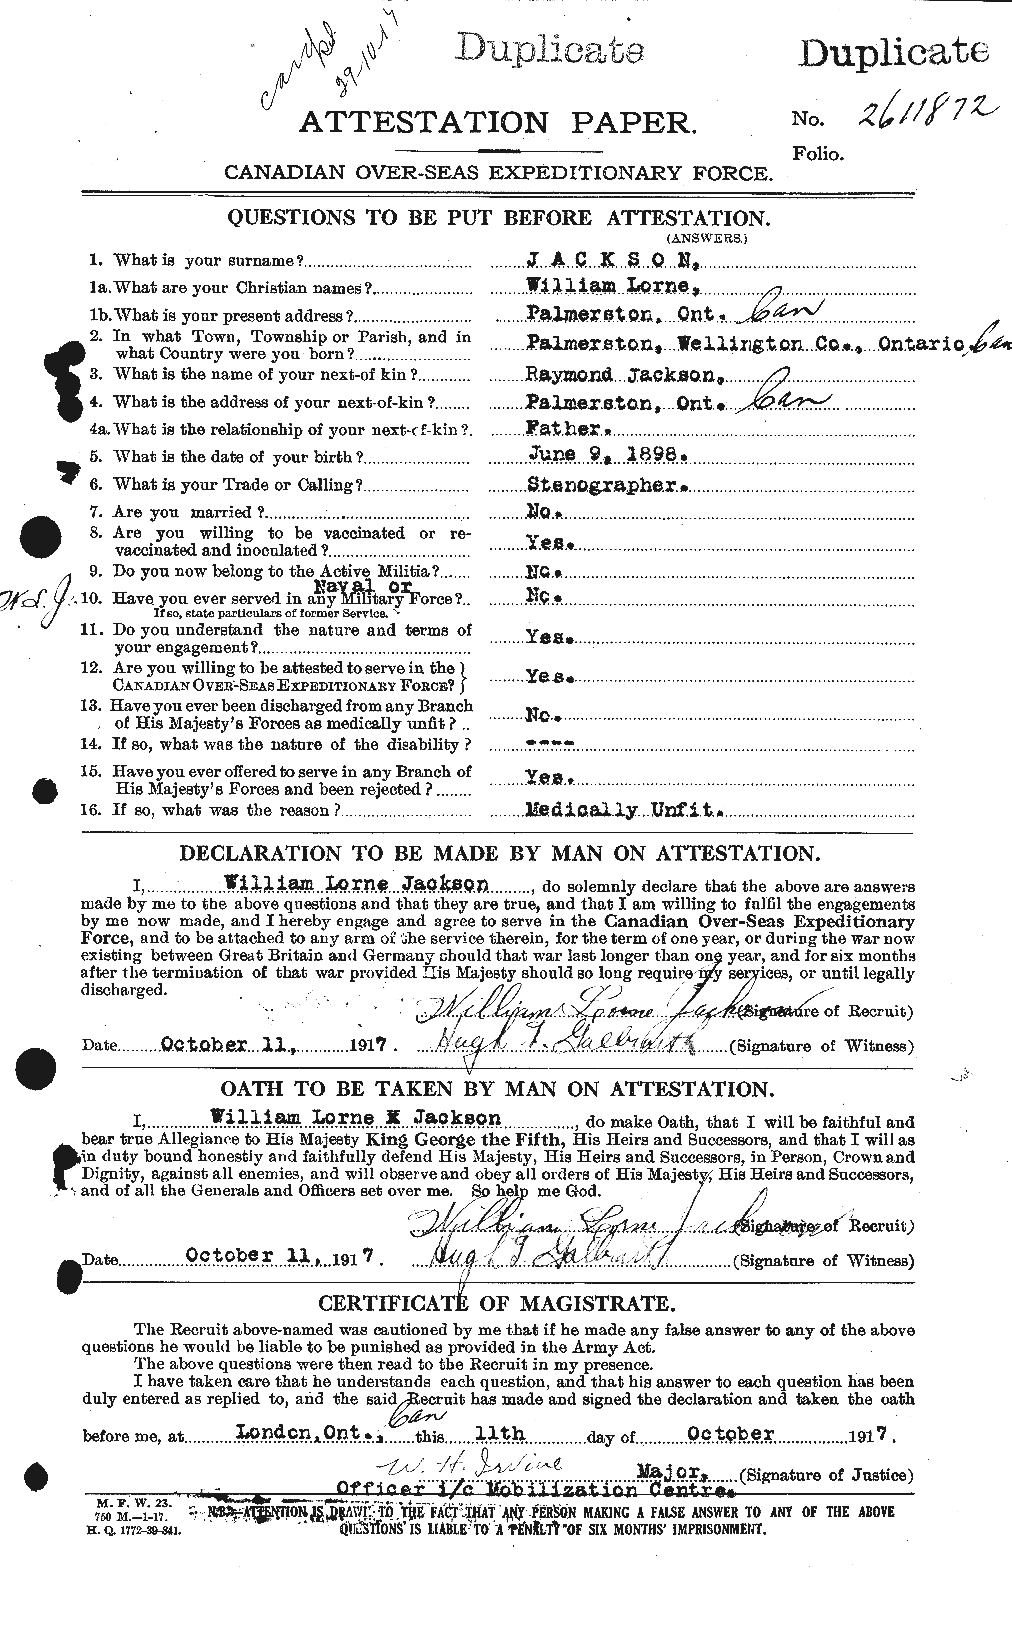 Personnel Records of the First World War - CEF 413031a